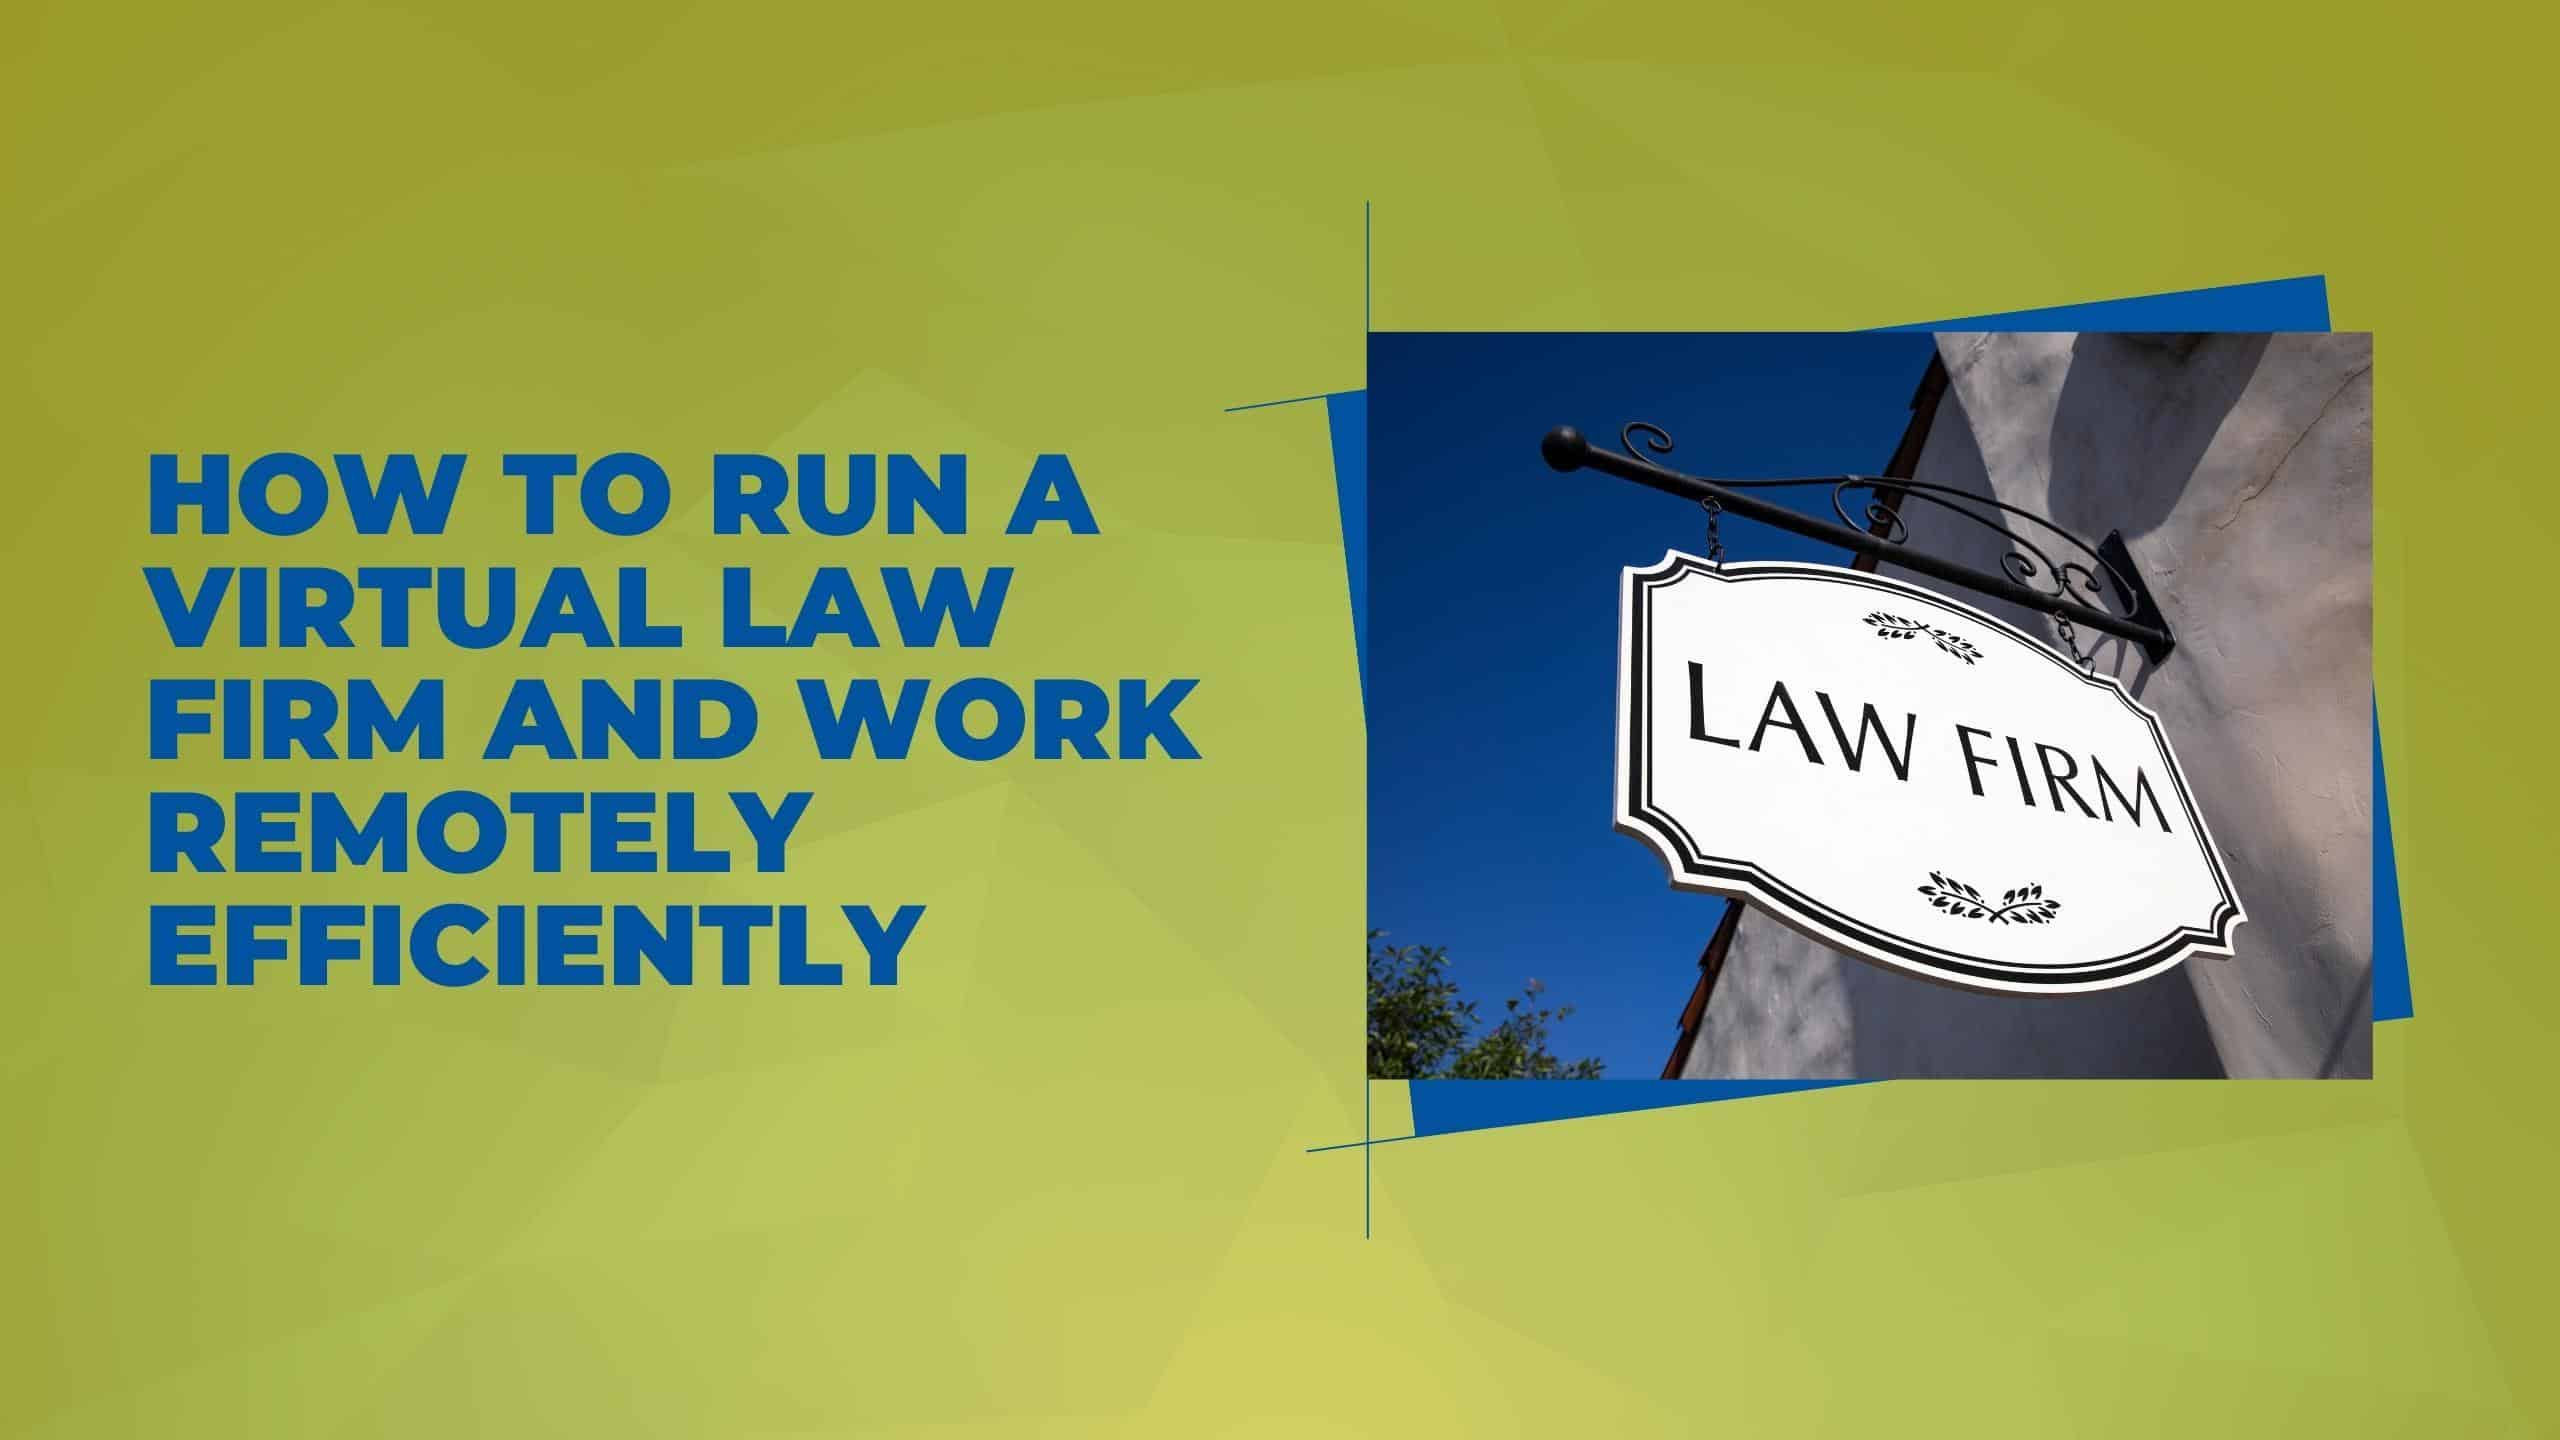 How To Run a Virtual Law Firm and Work Remotely Efficiently